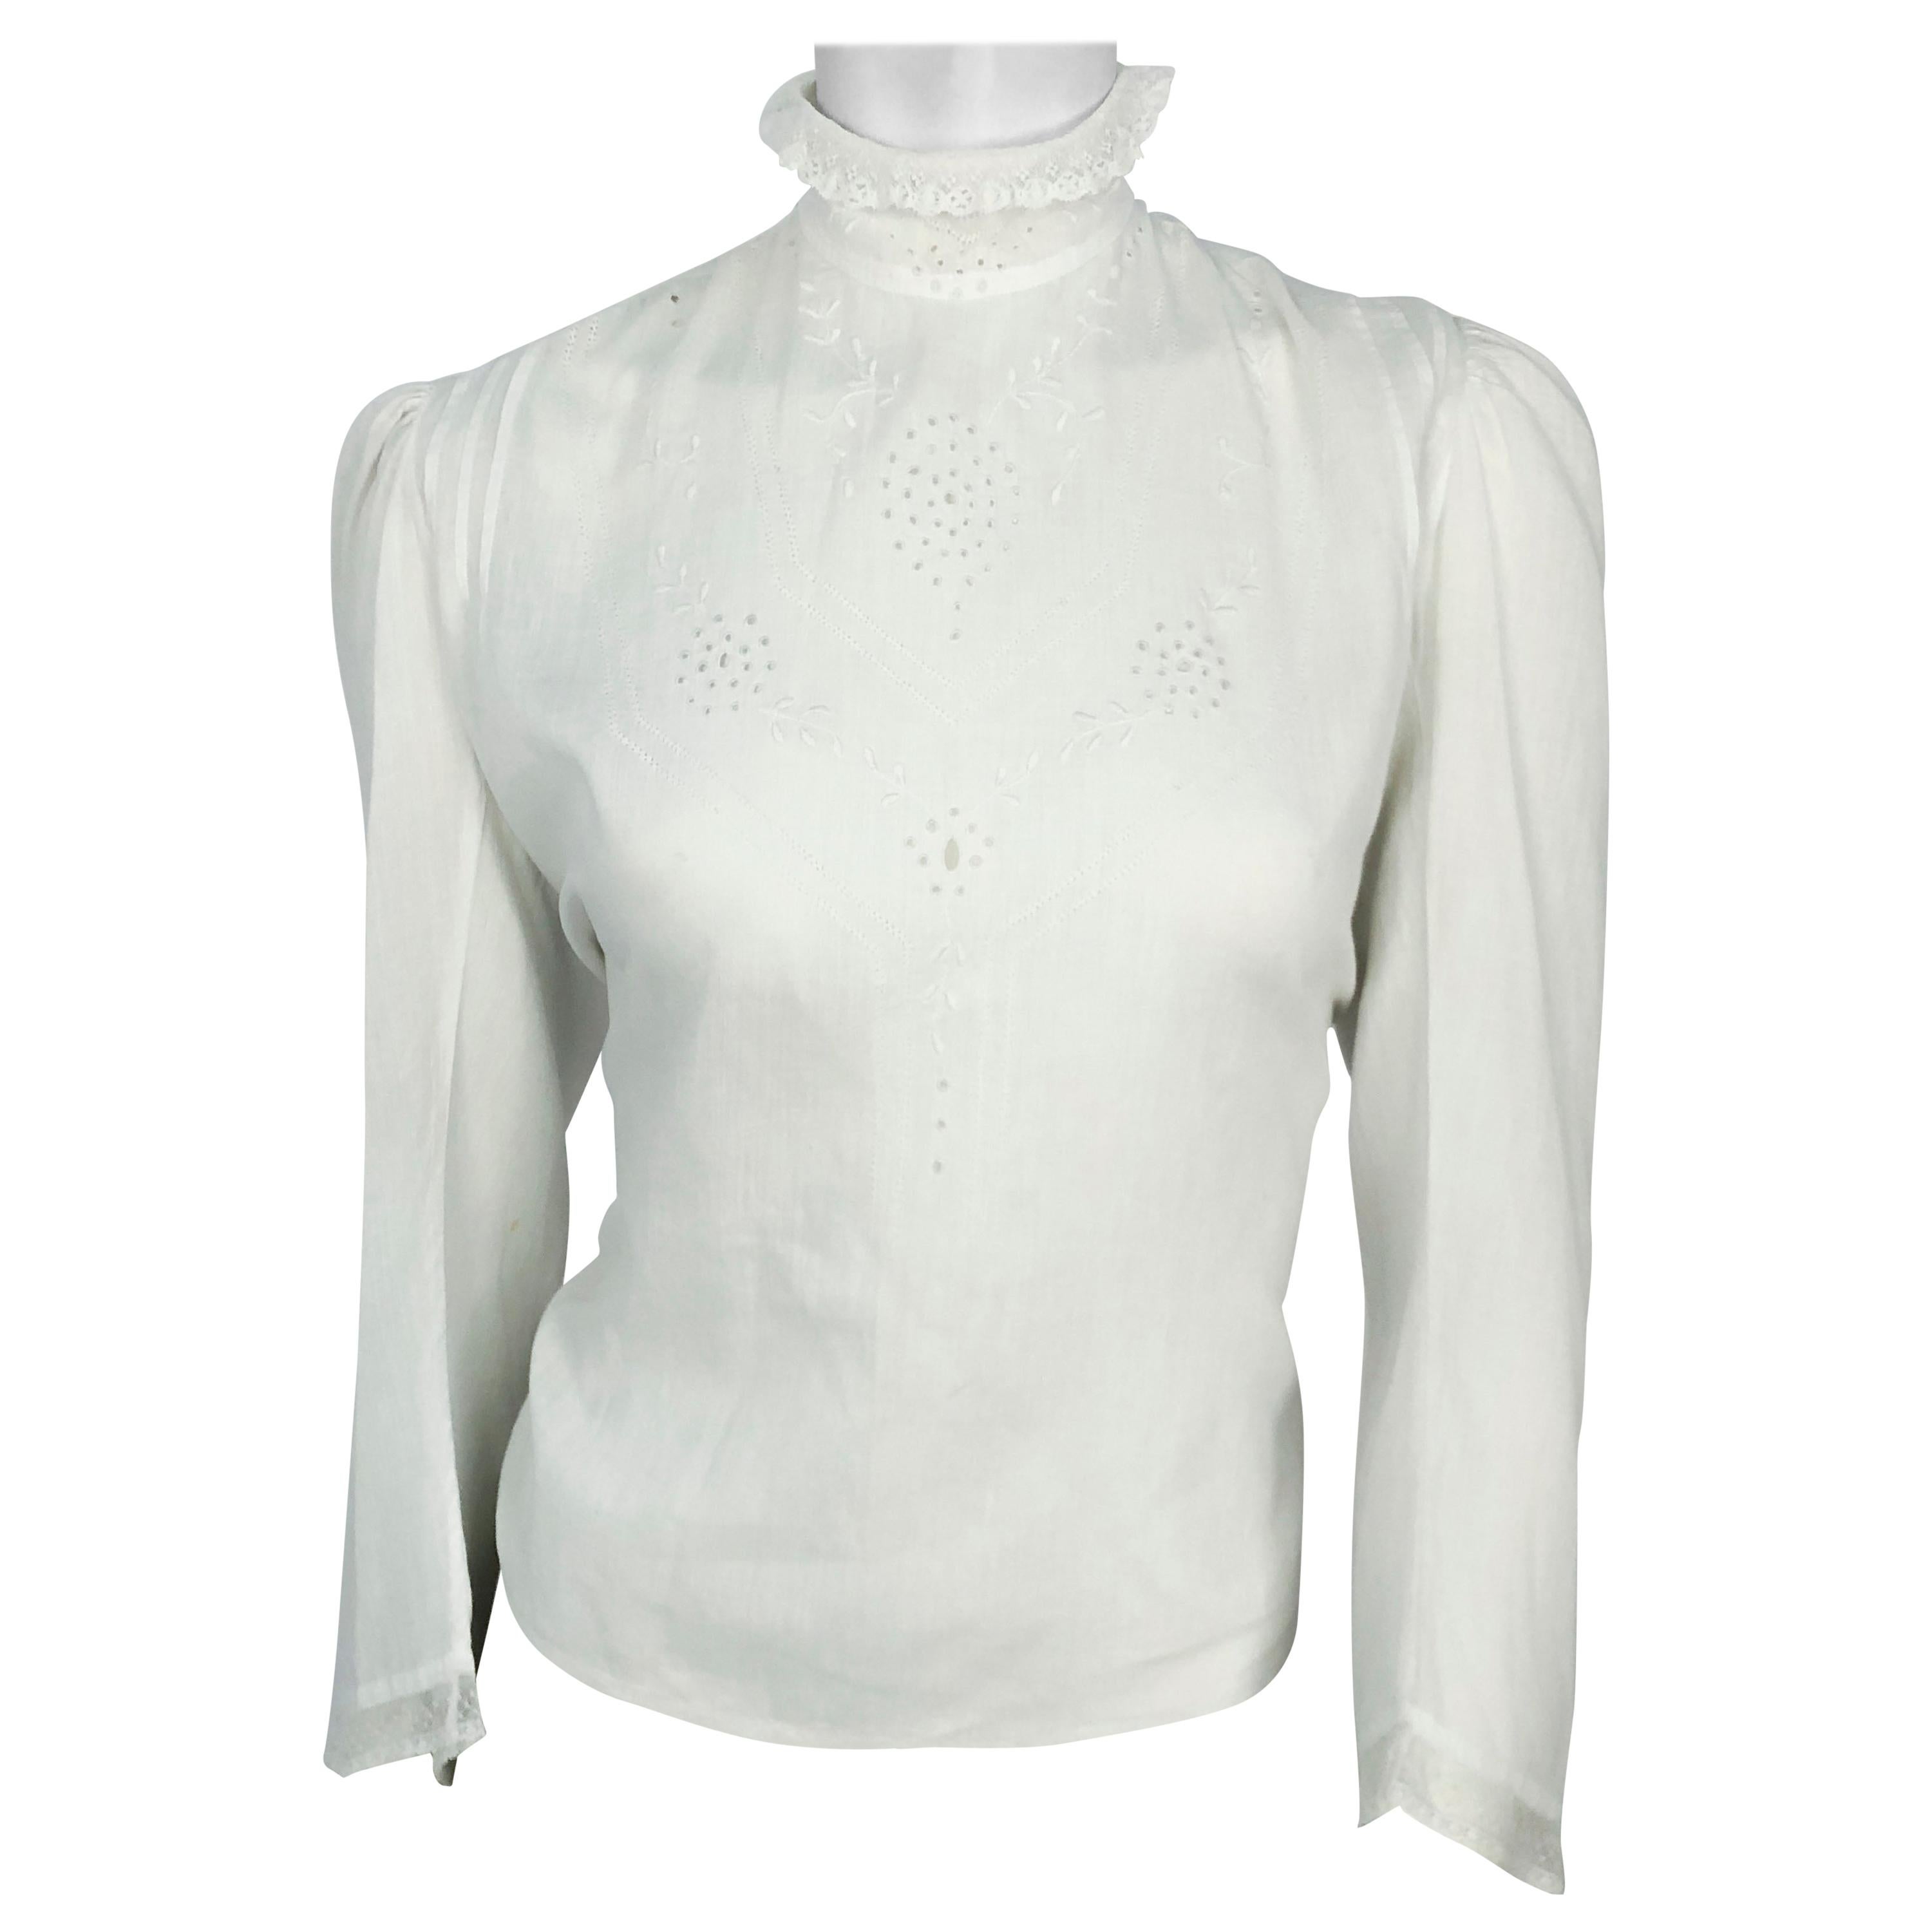 Edwardian White Day Blouse with Embroidery and Lace 